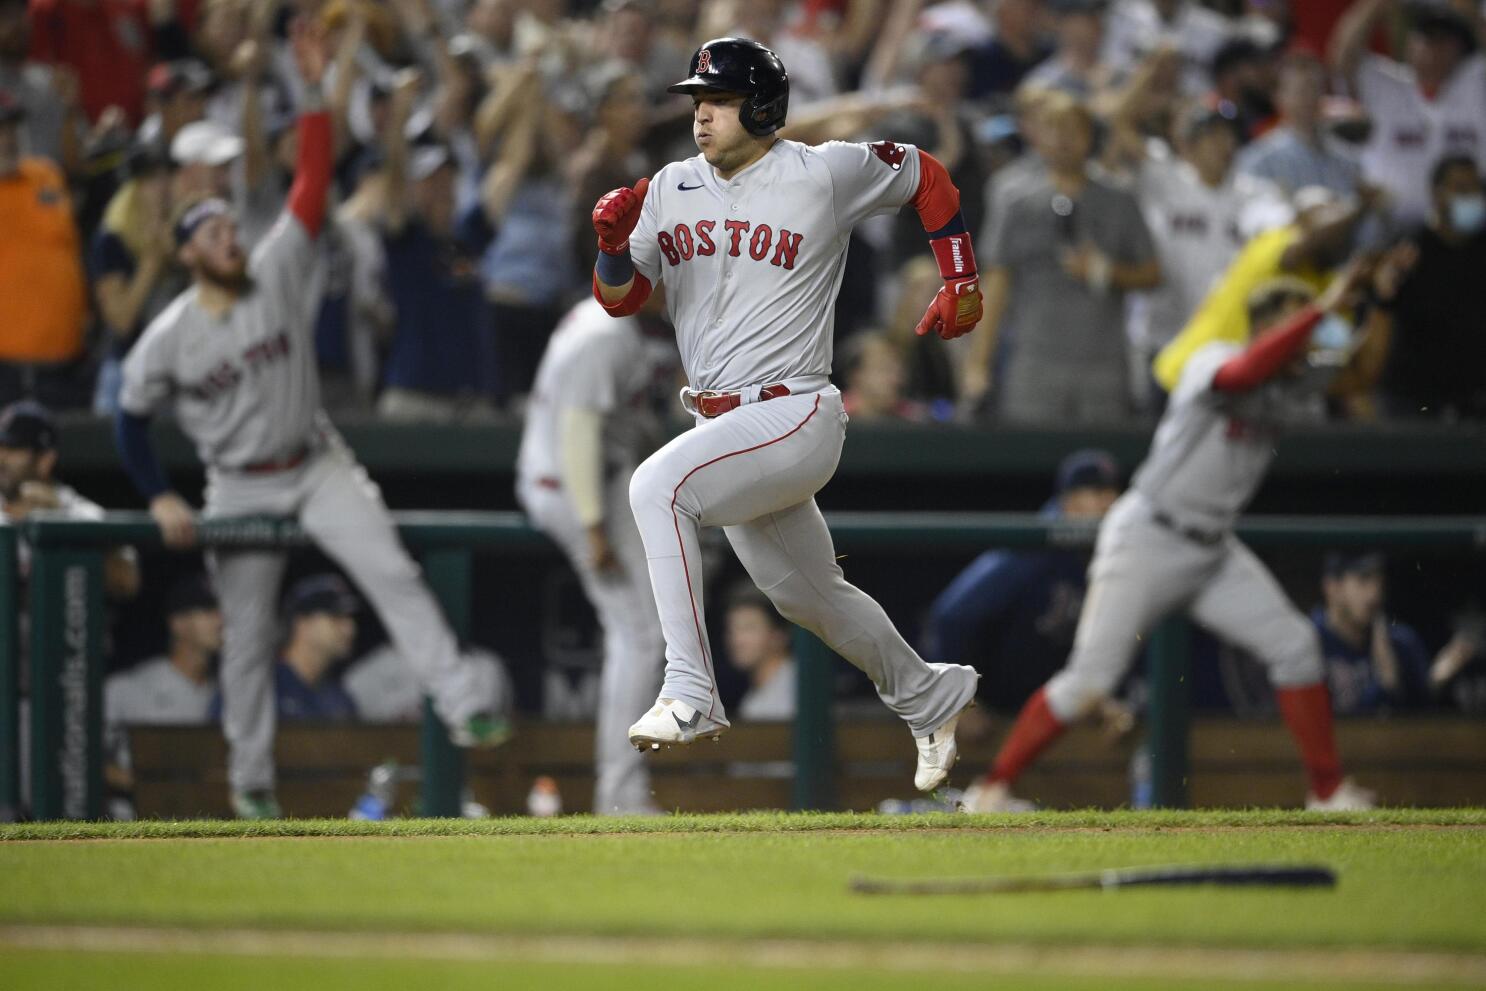 Christian Vazquez's walk-off homer lifts Red Sox over Rays - Los